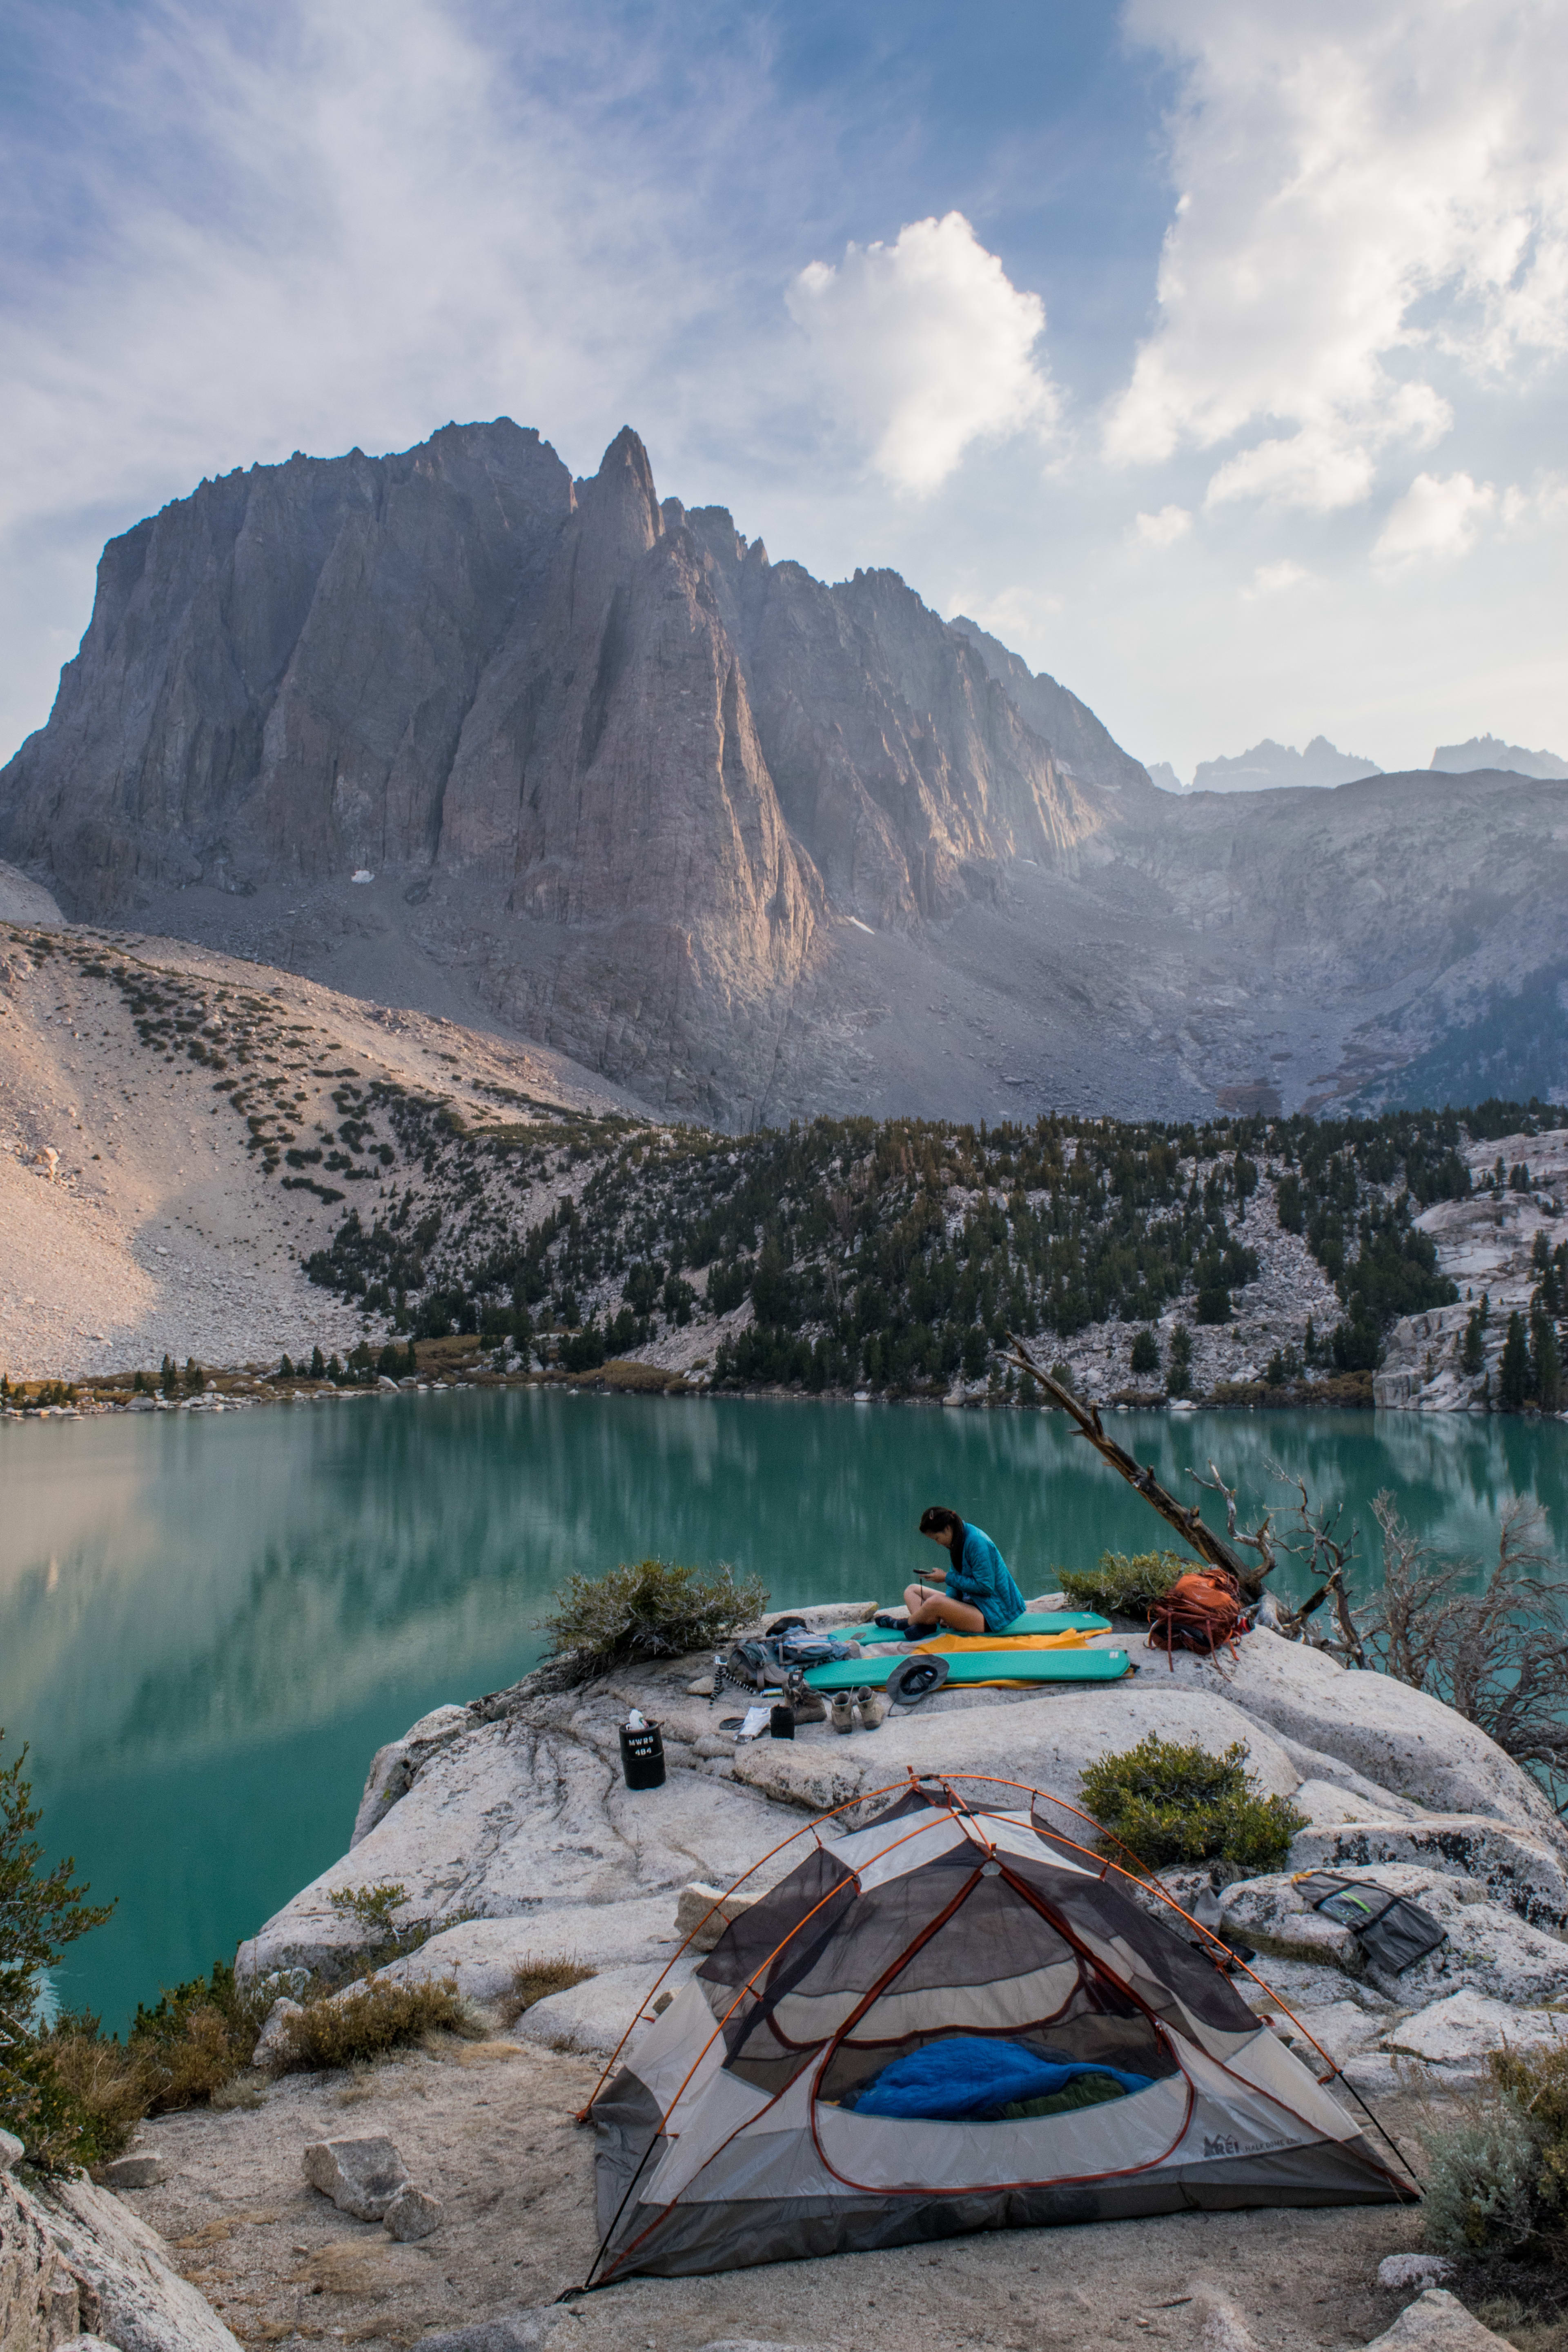 Starting from Big Pine Campground, we hiked into the mountains to finish here at 2nd lake below Temple Crag. Remains one of the coolest spots I've been lucky enough to set-up camp at. The views were so great, that we just had to soak it up outside the tent!